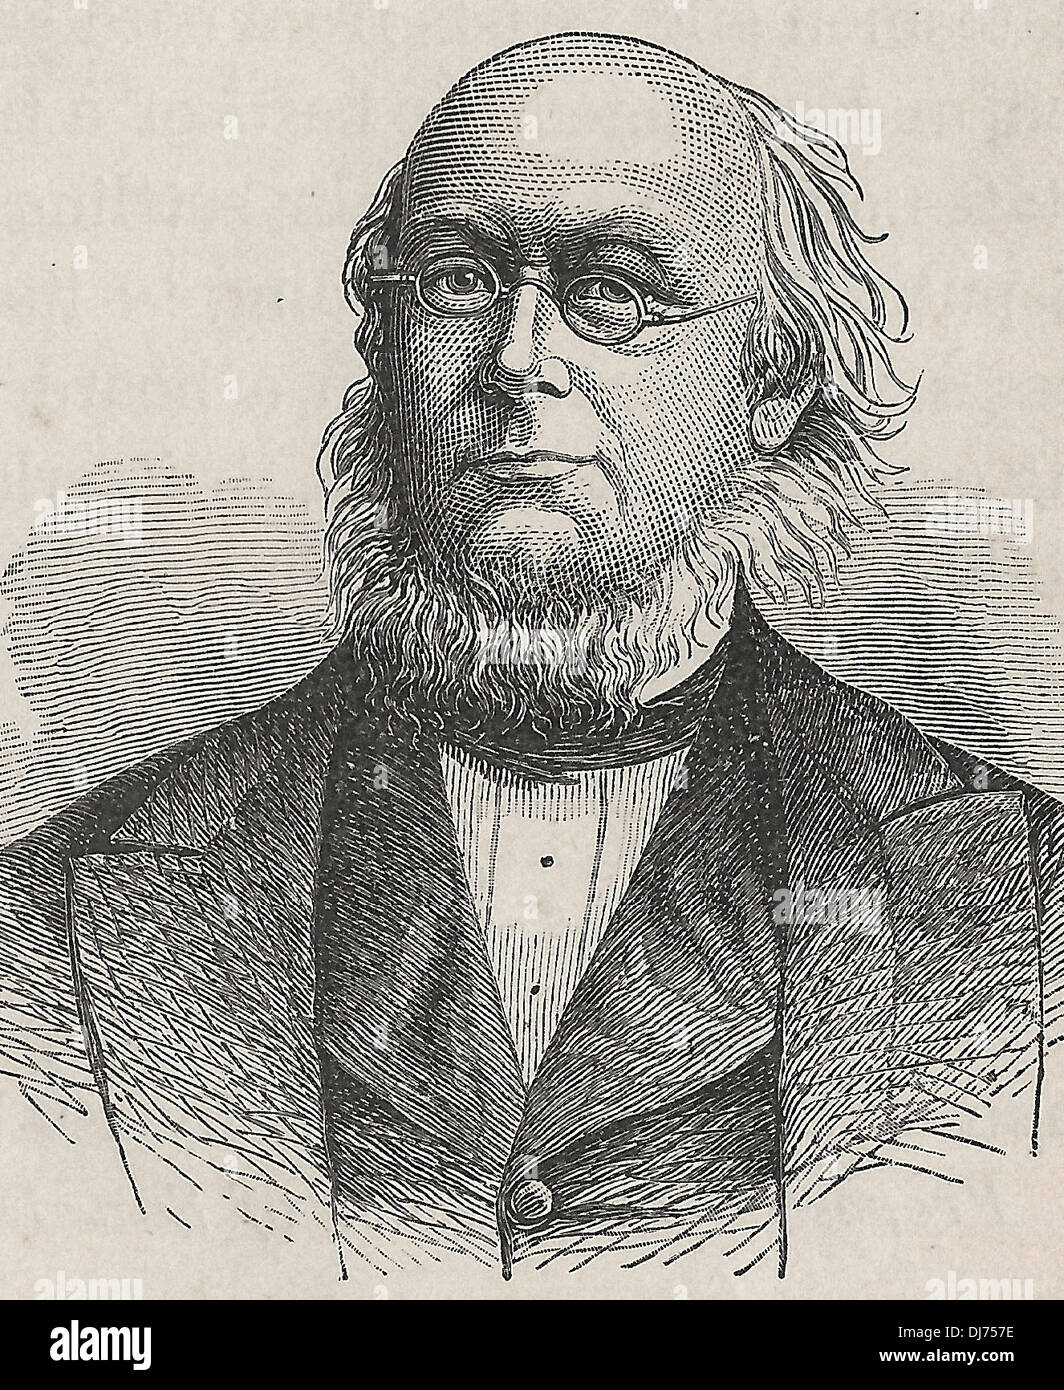 Horace Greeley, newspaper editor, founder of Liberal Republican Party and candidate for USA President, circa 1870 Stock Photo